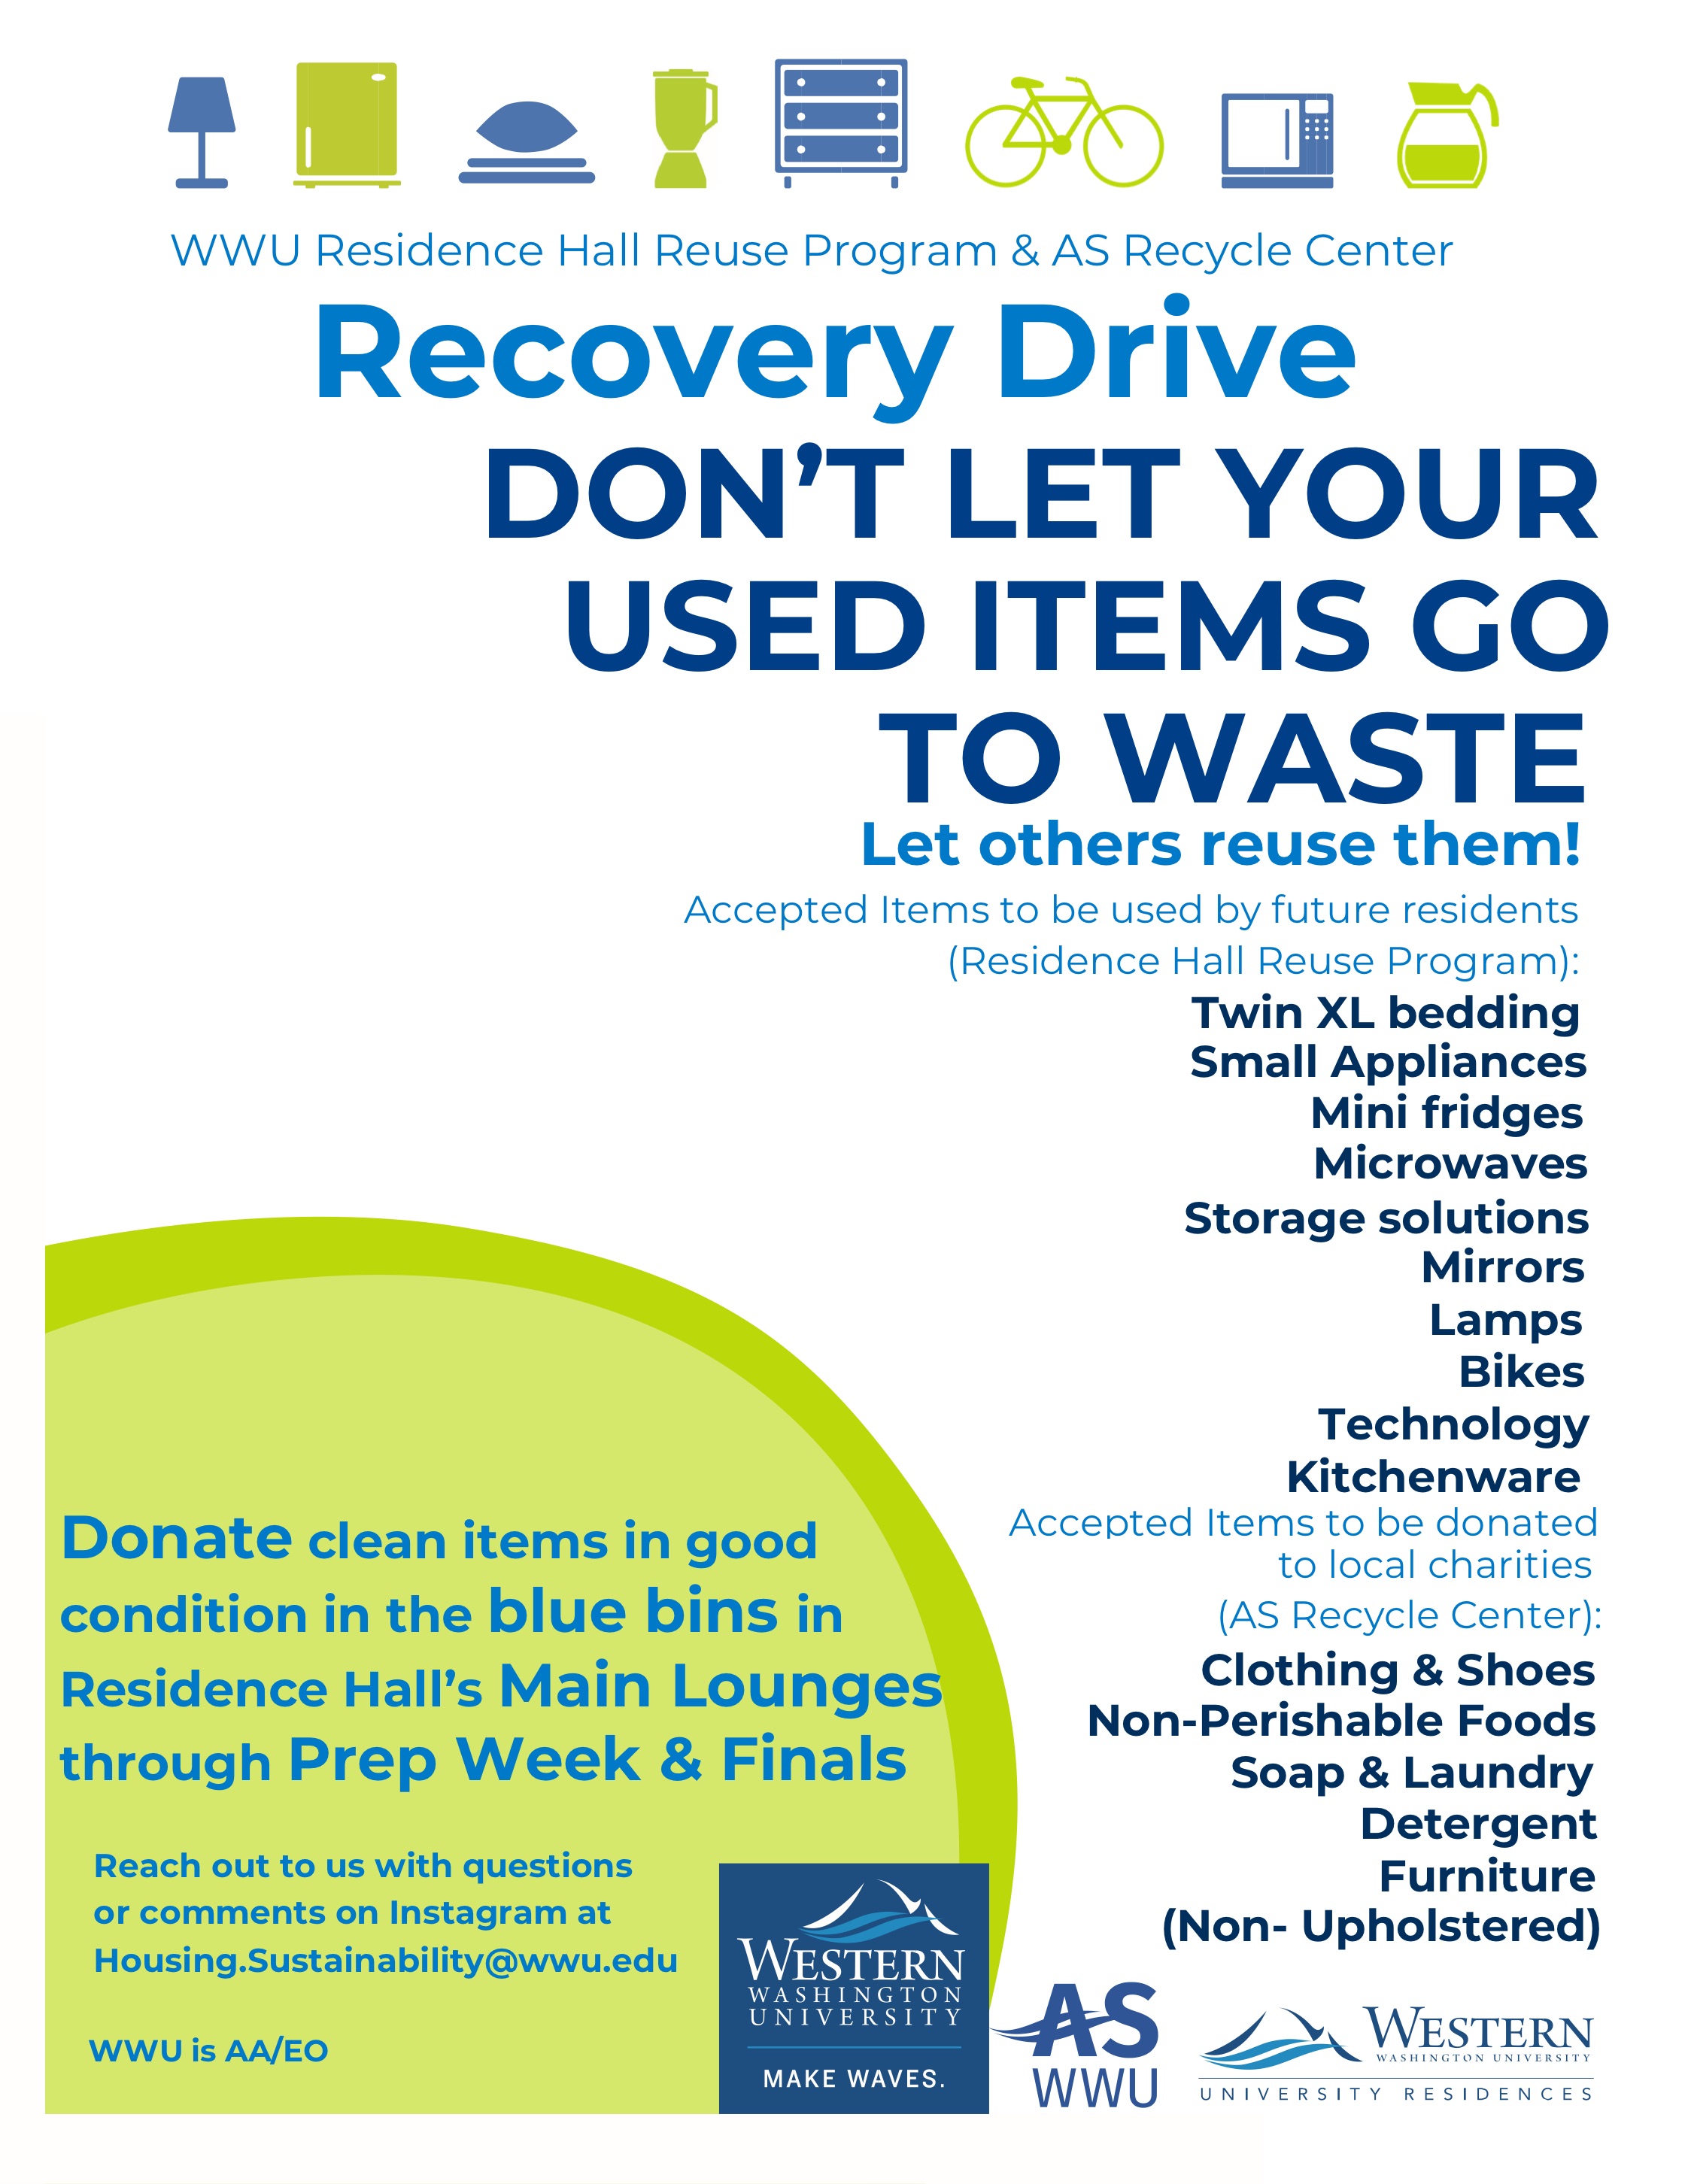 Poster Reads: Recovery Drive. Don't Let Your Used Items Go To Waste. Let others reuse them!